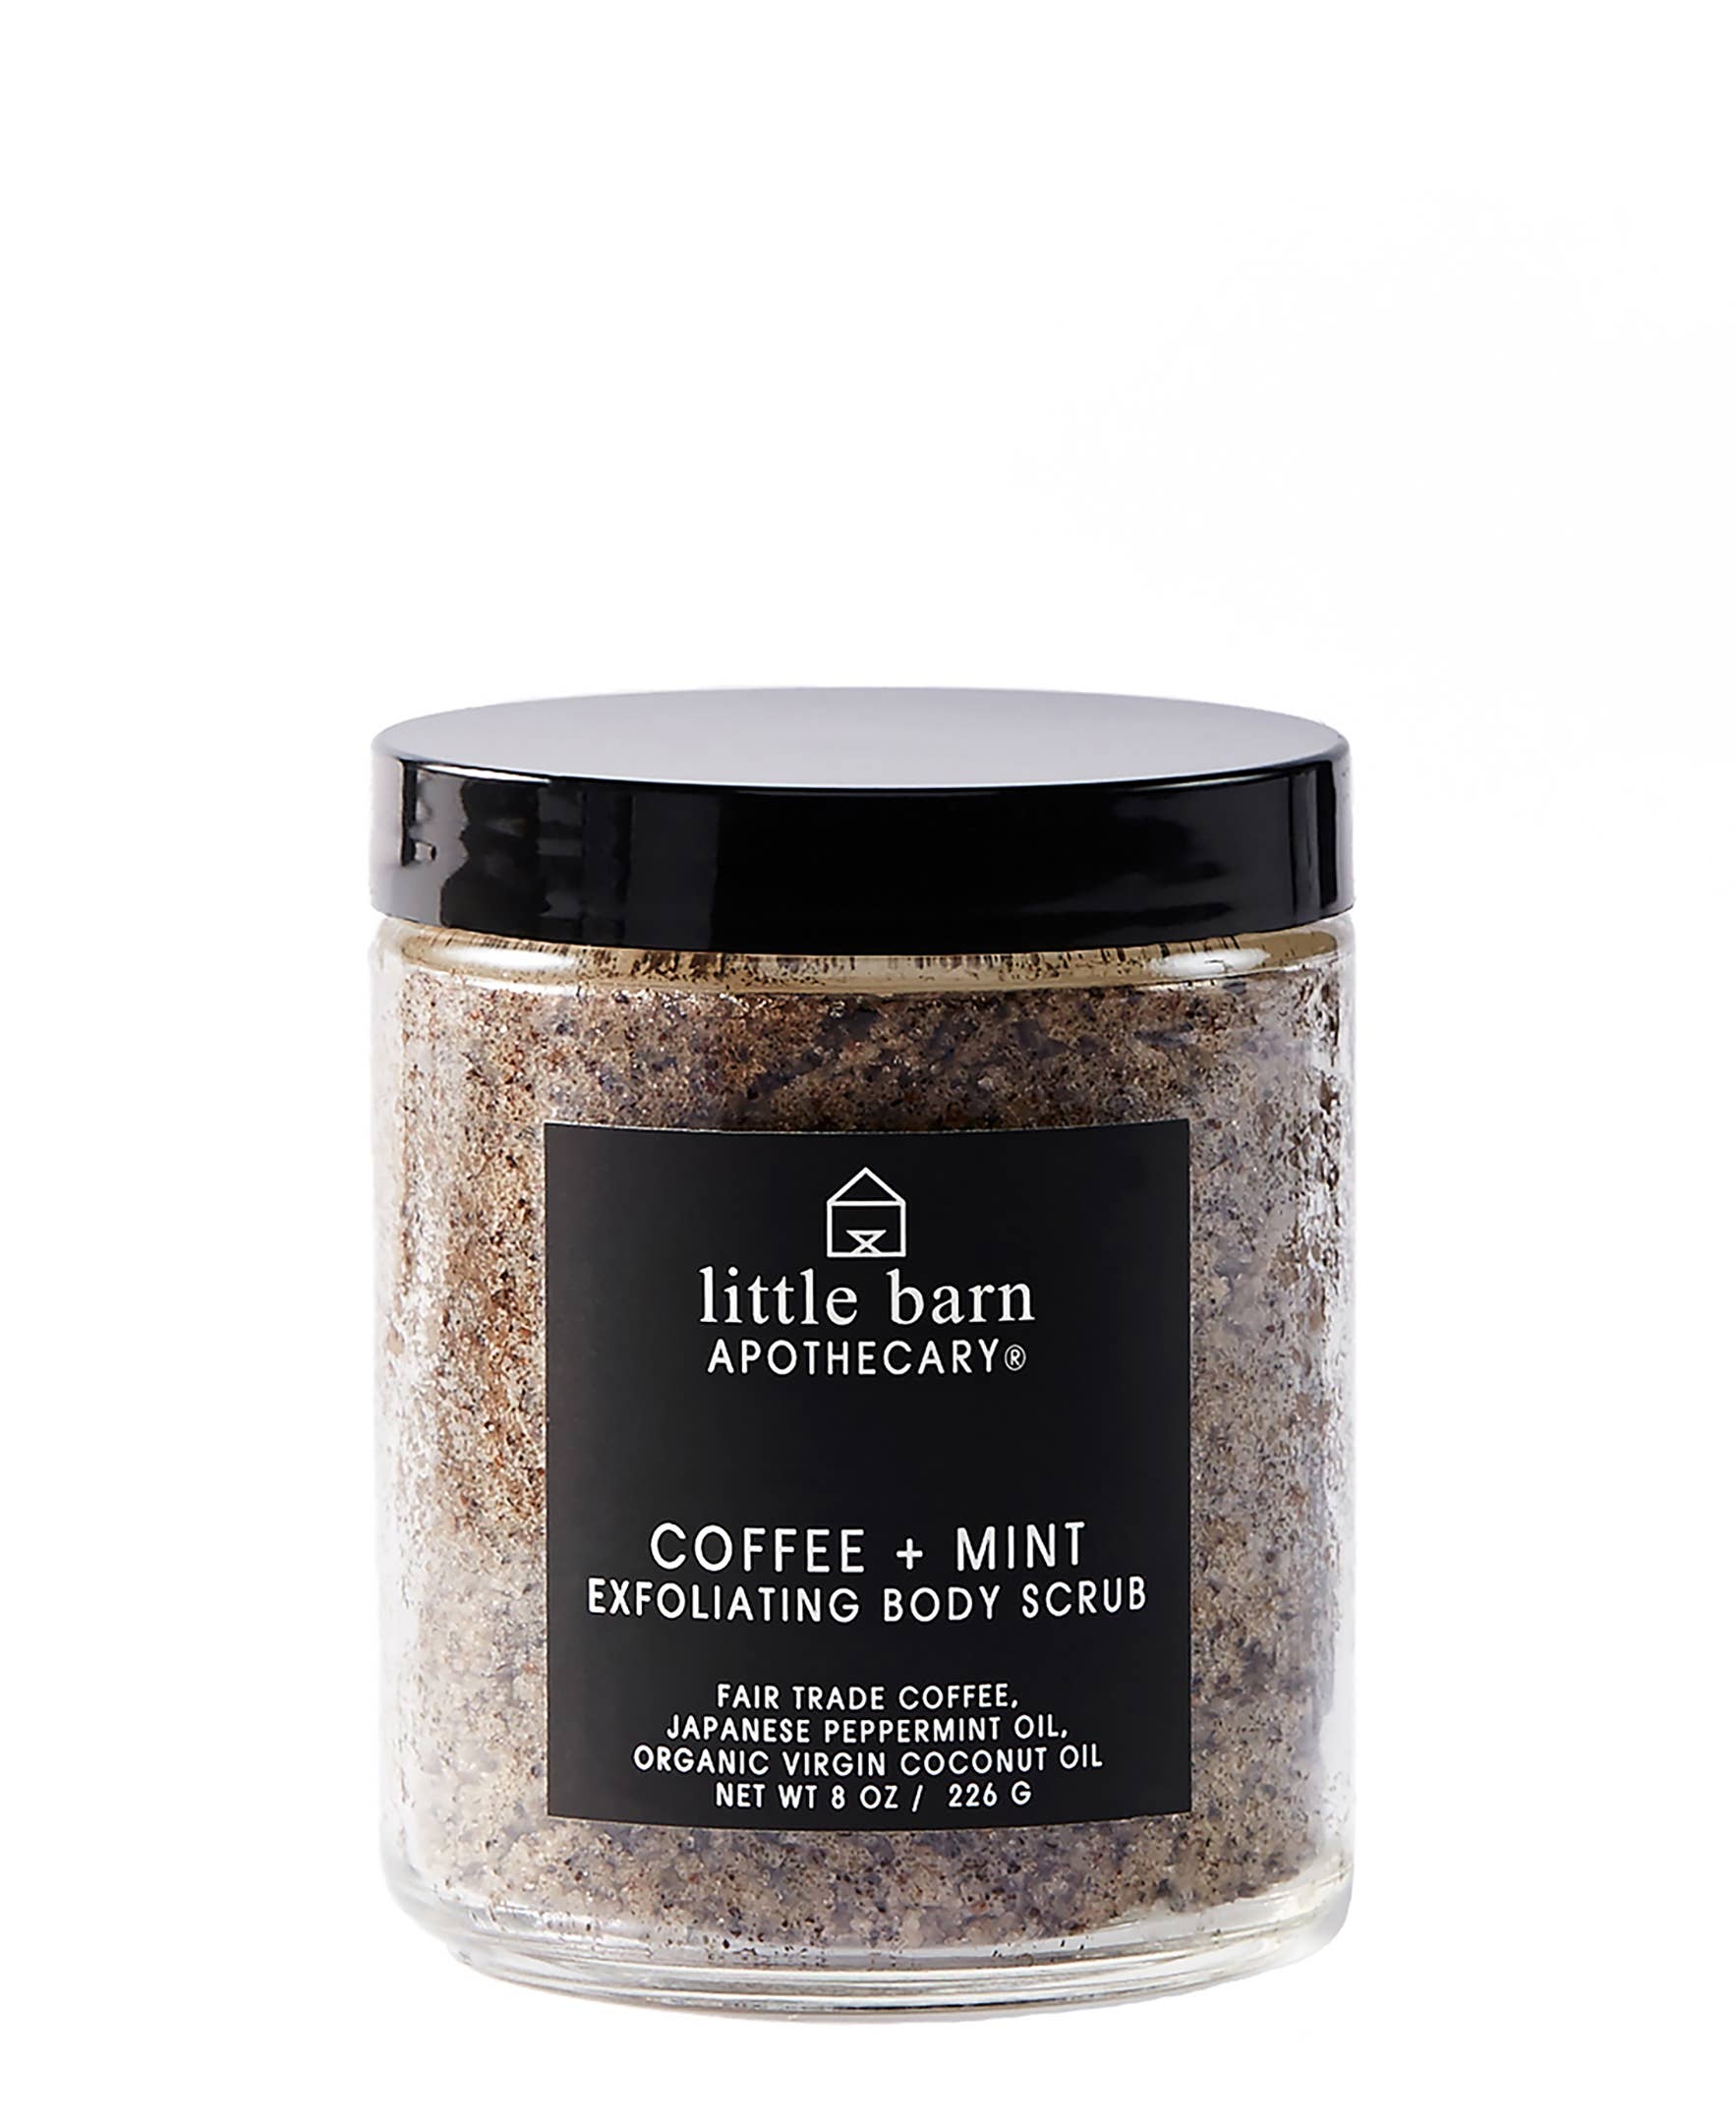 Little Barn Apothecary Coffee and Mint Exfoliating Body Scrub